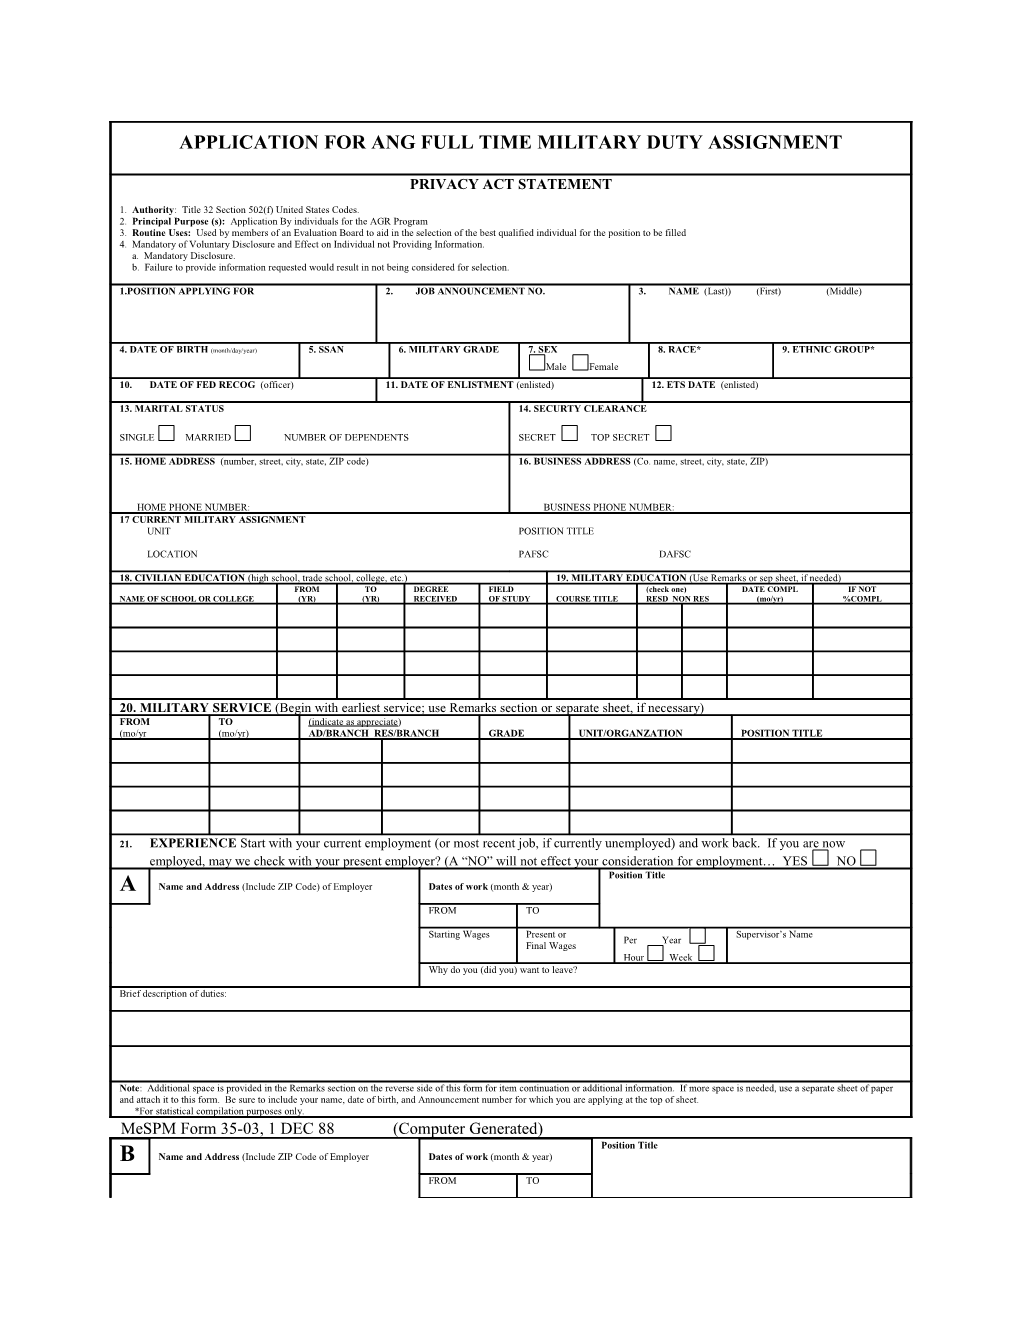 Application for Ang Full Time Military Duty Assignment